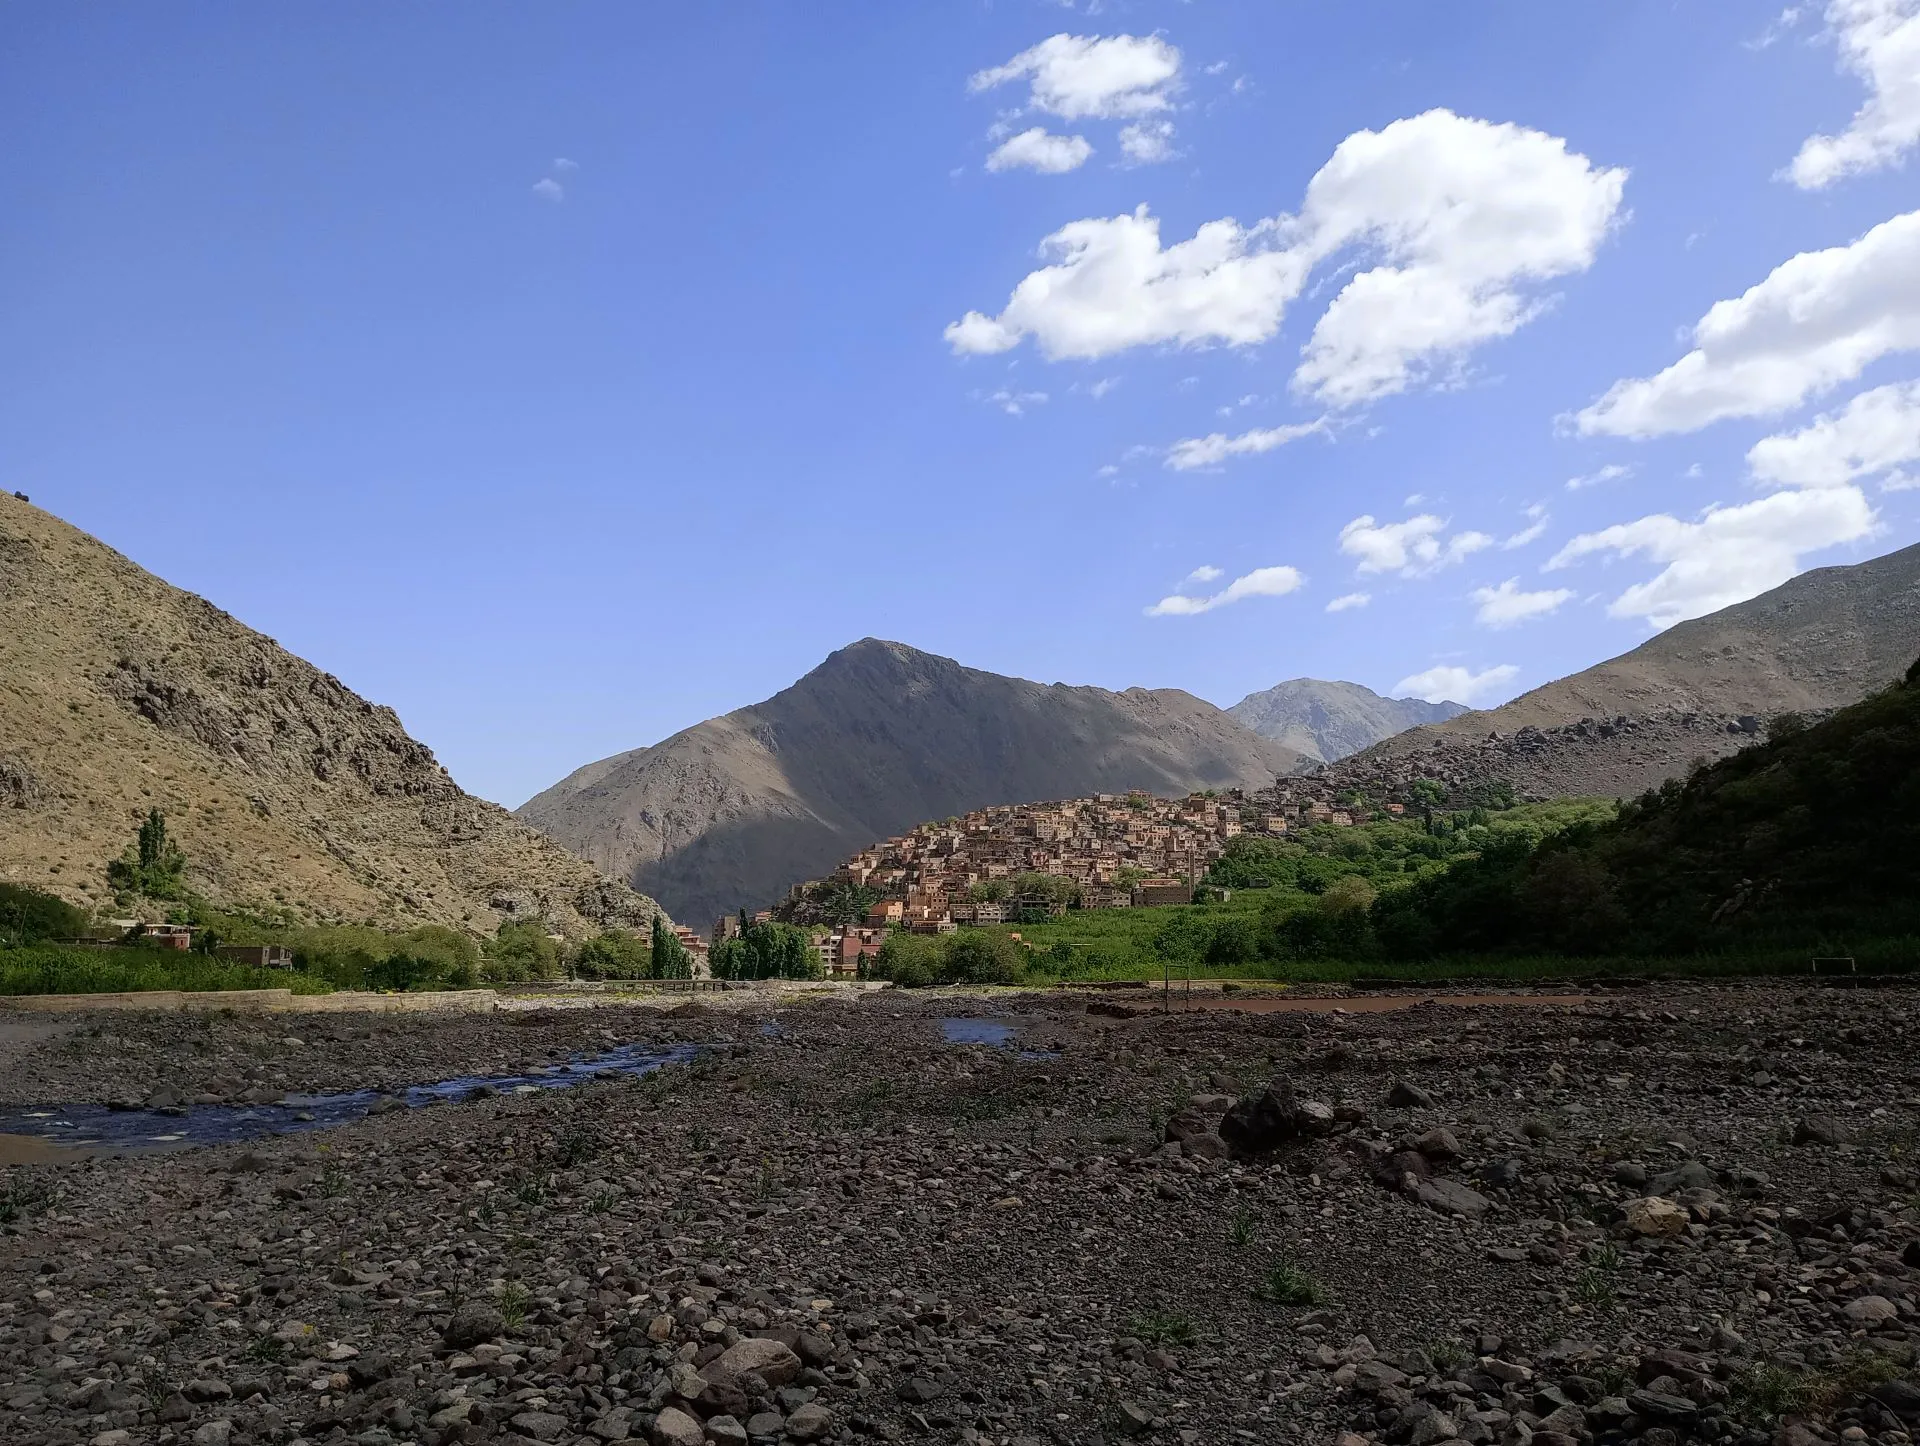 An image of Aroumd in the high Atlas mountains